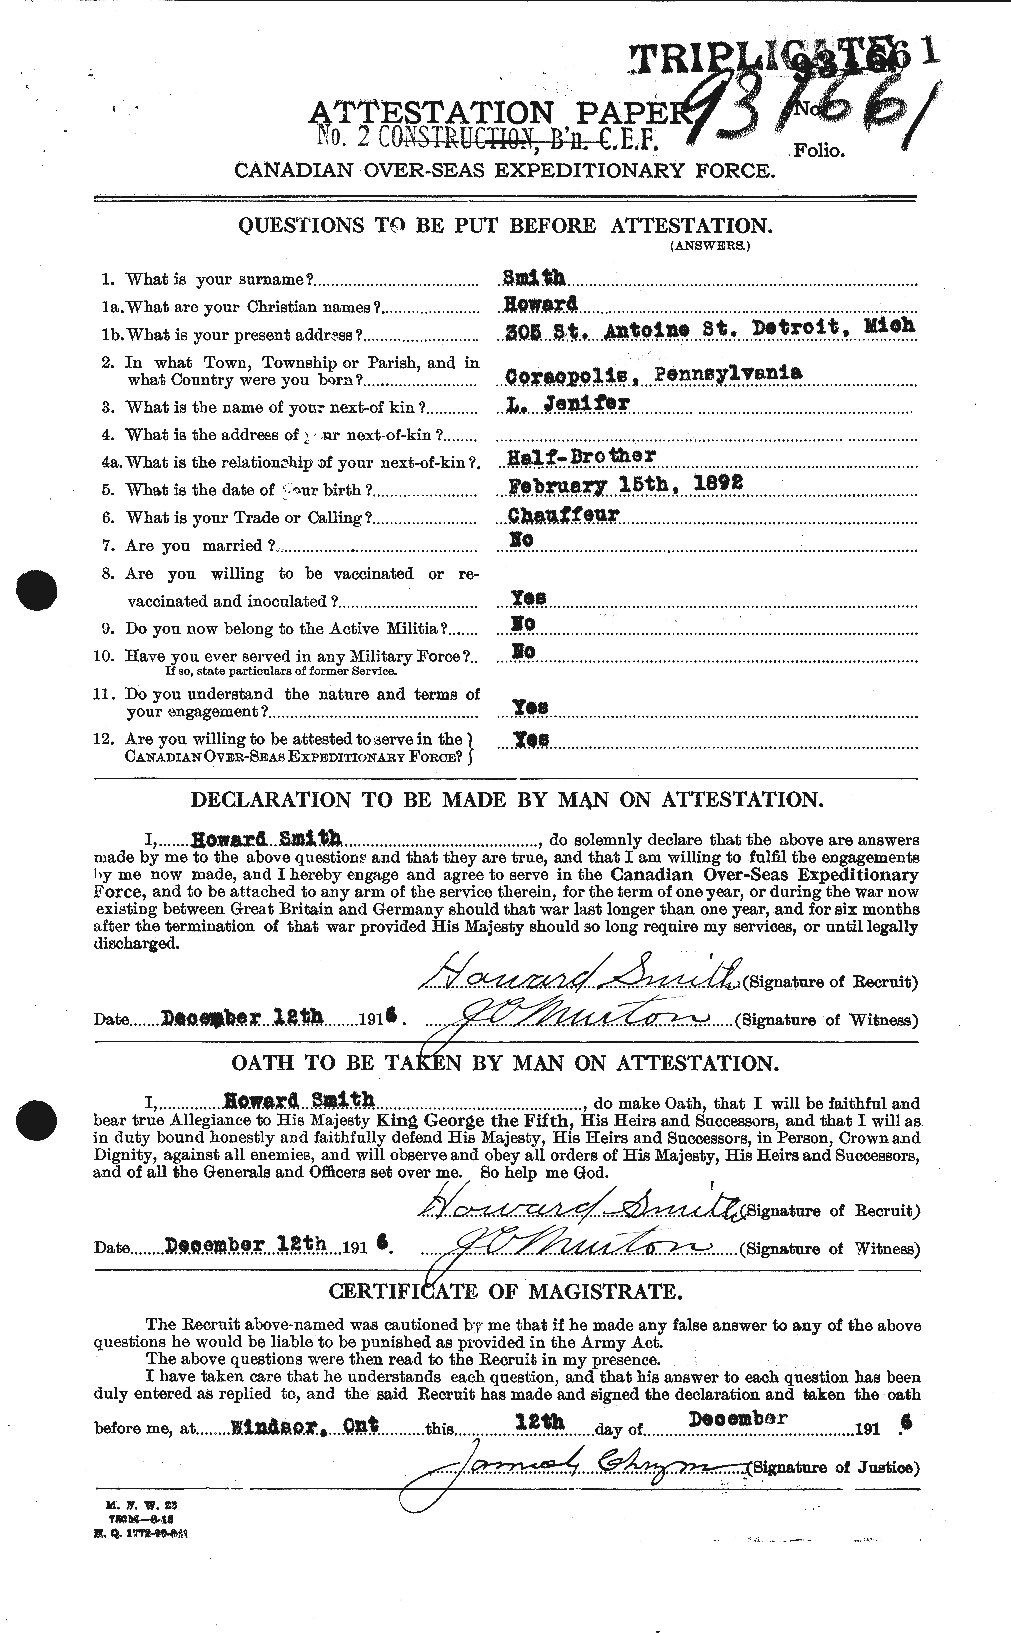 Personnel Records of the First World War - CEF 104571a